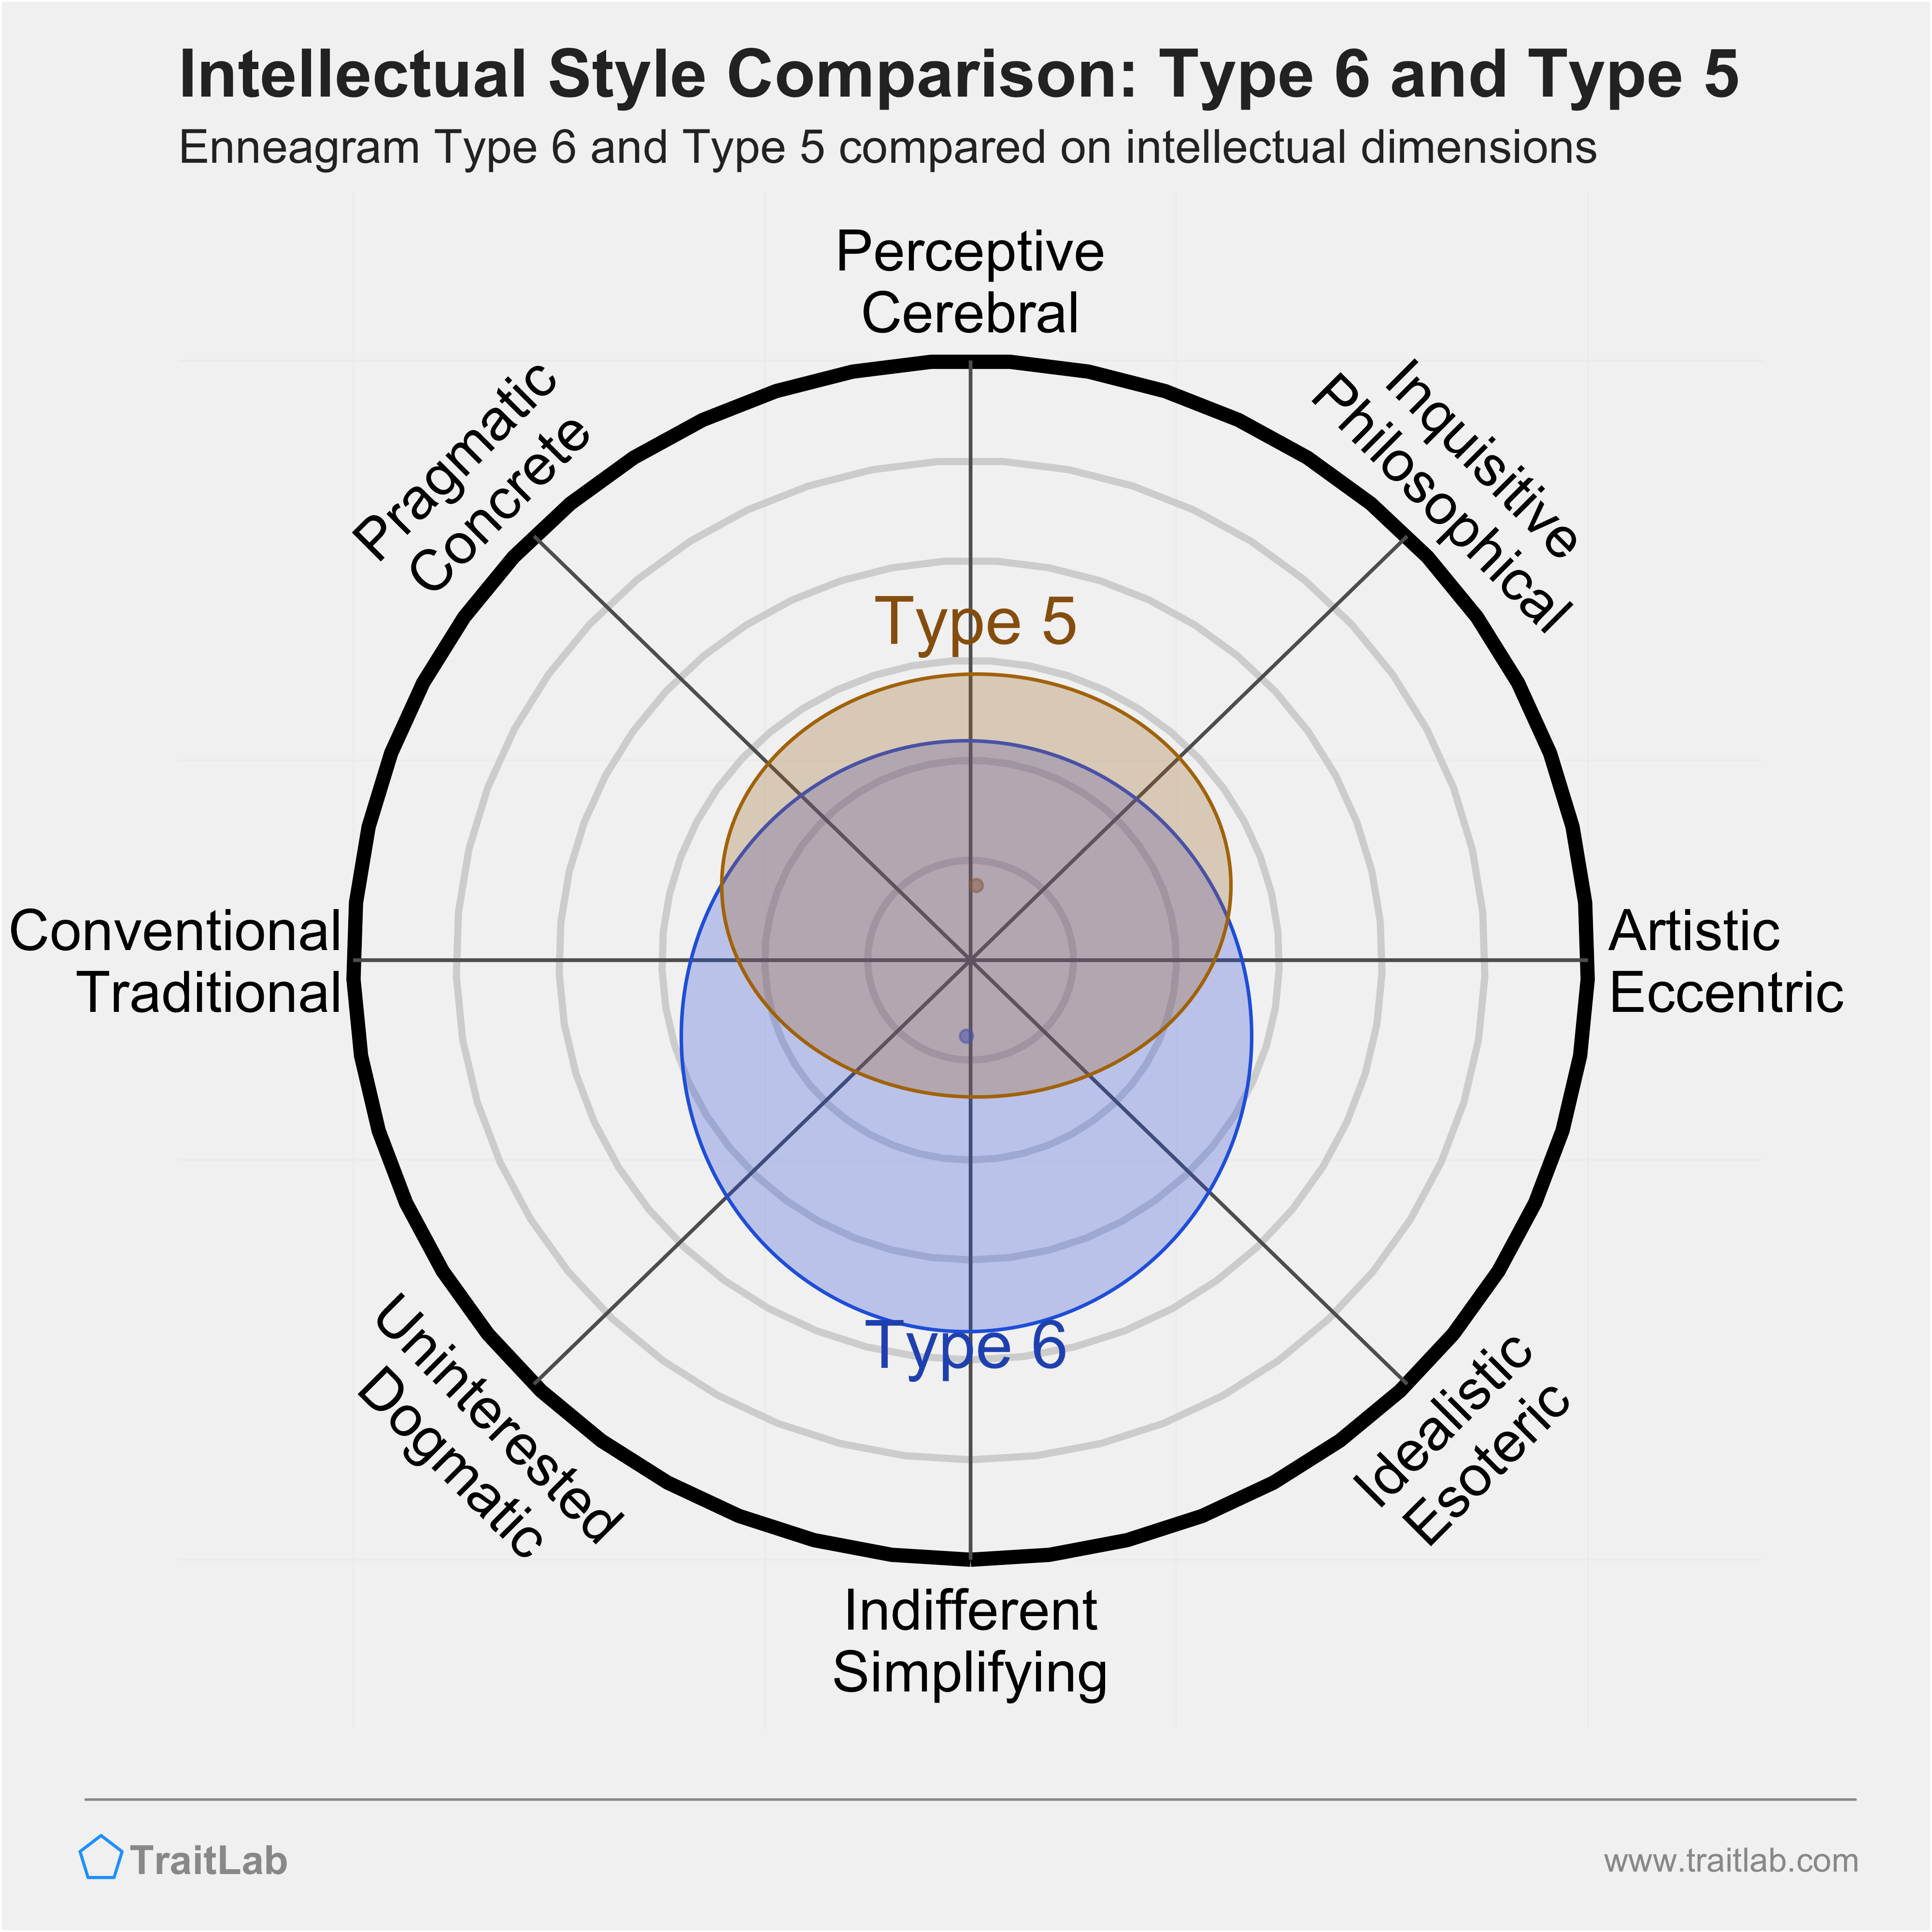 Type 6 and Type 5 comparison across intellectual dimensions